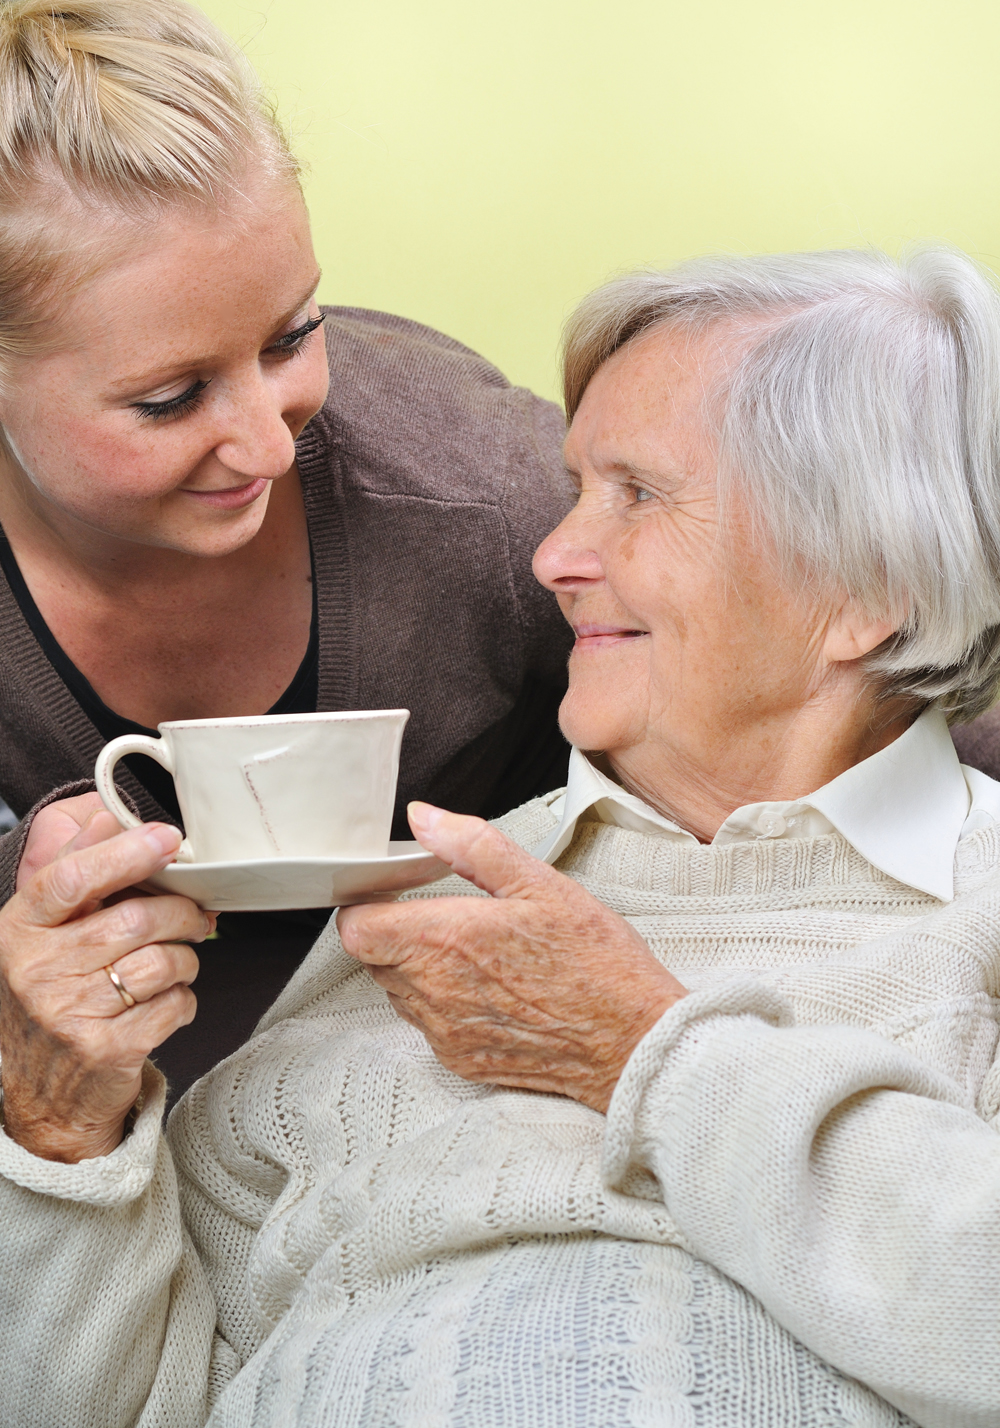 A Home Companion: The Benefits of Roommates for Elderly People